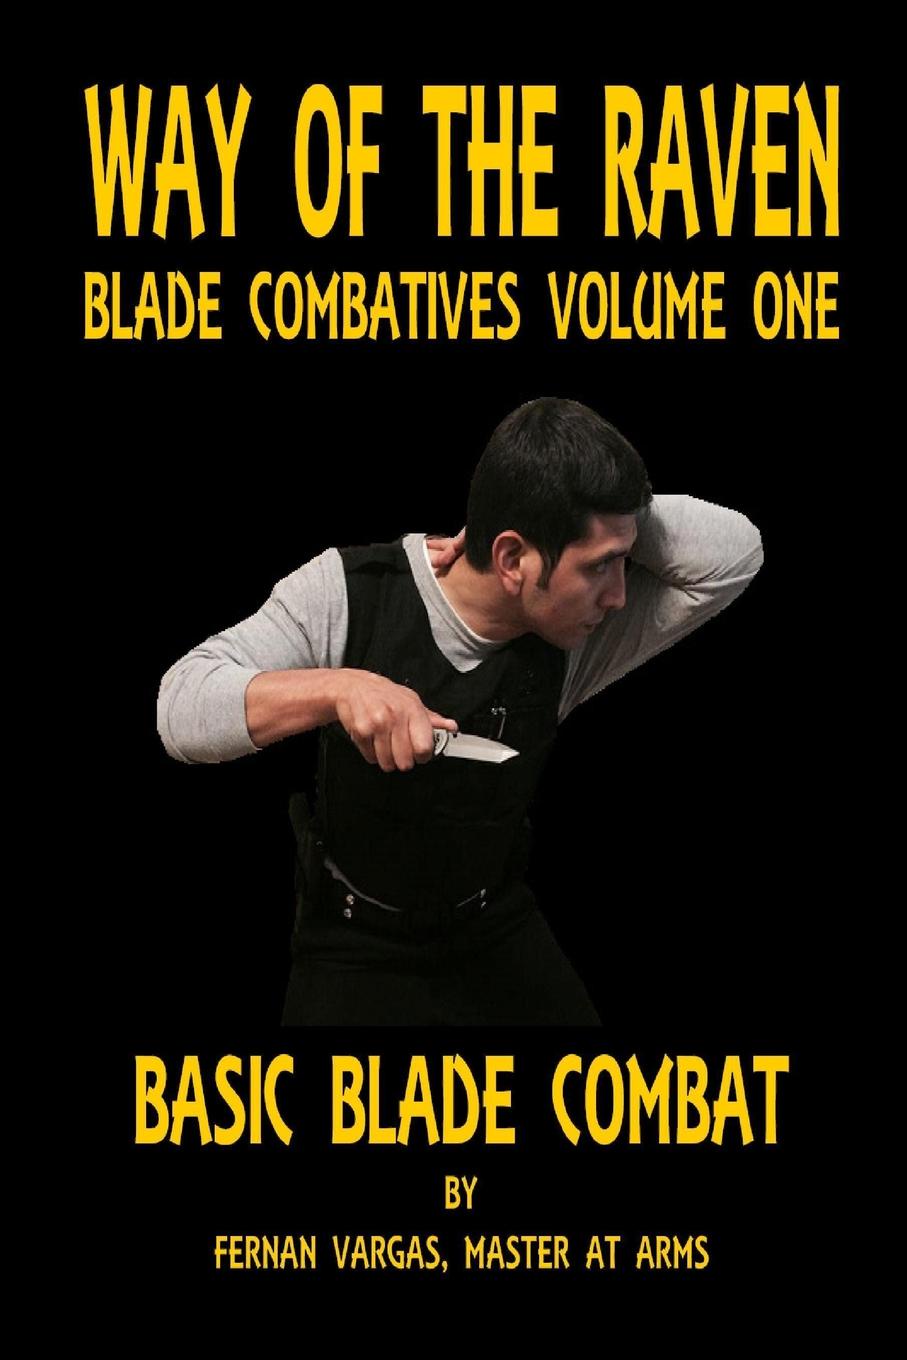 Way of the Raven Blade Combatives Volume One. Basic Blade Combatives